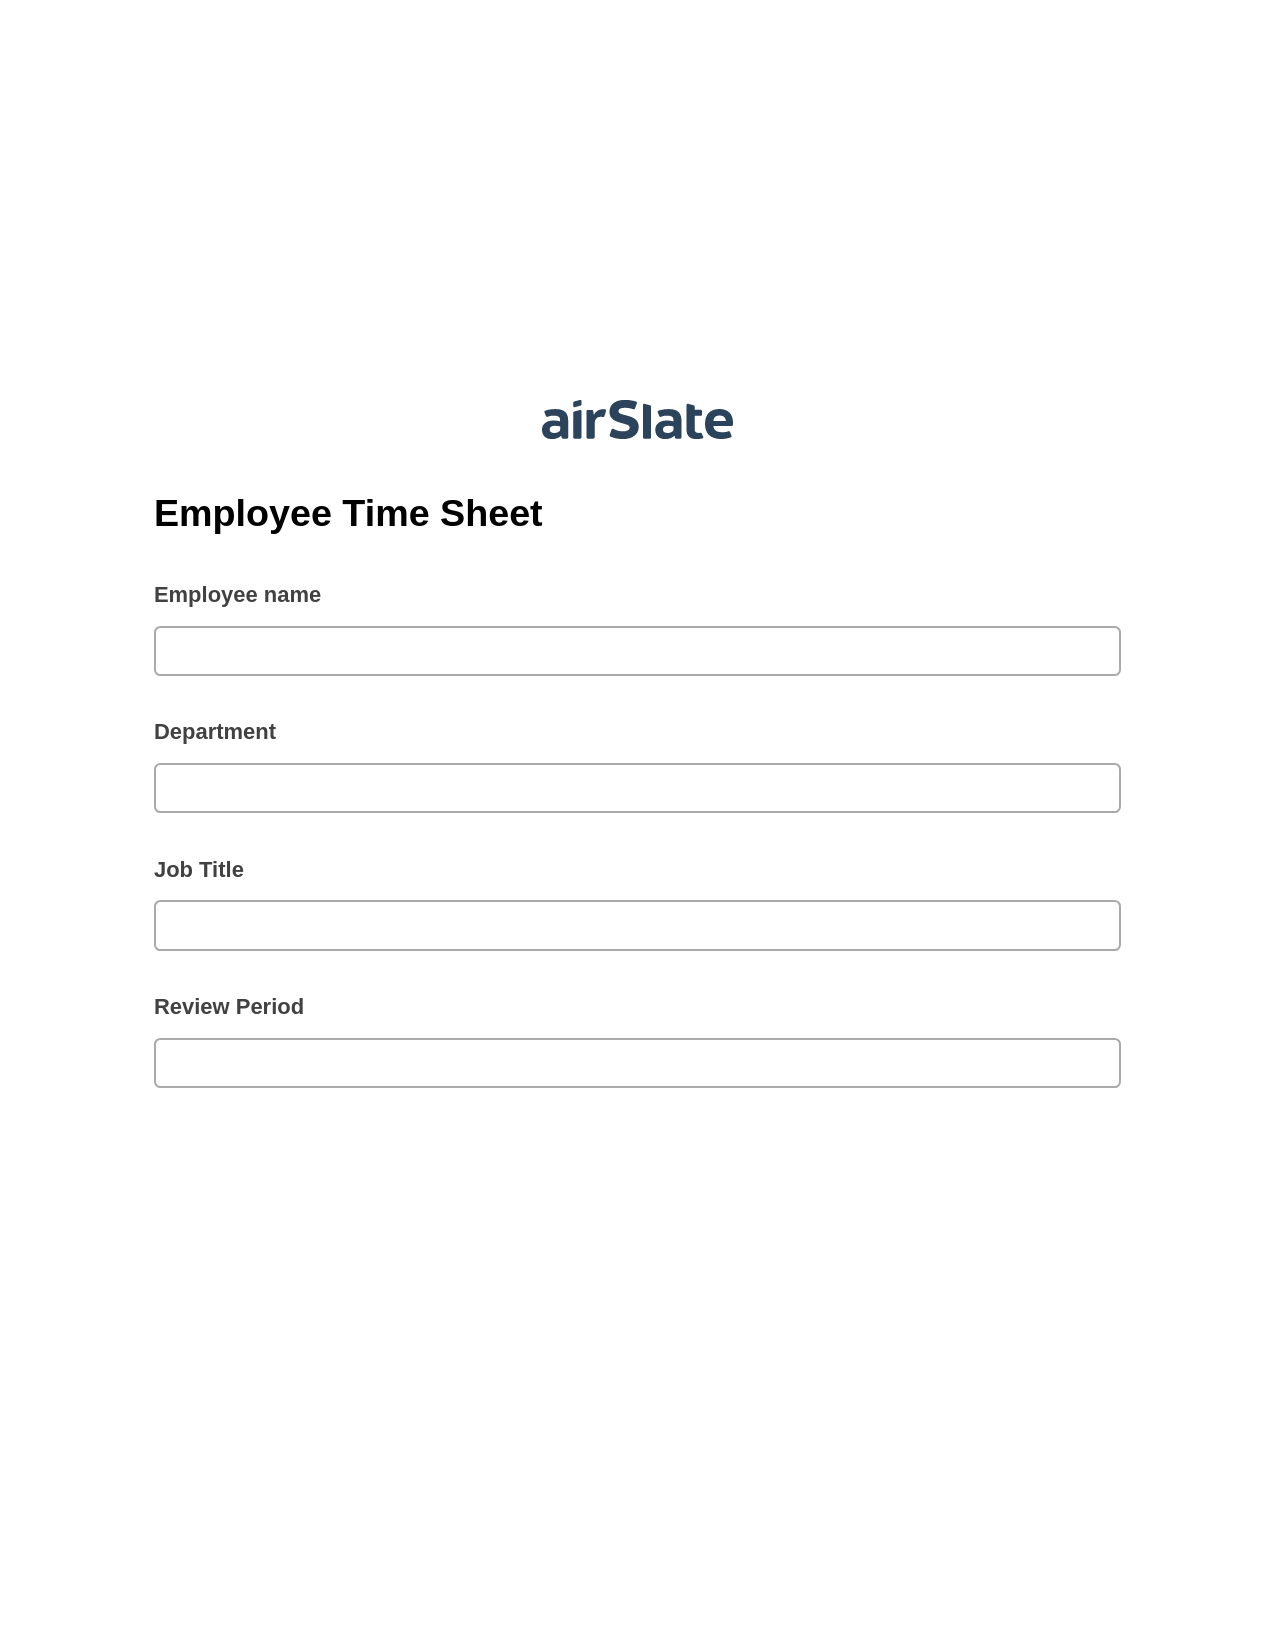 Employee Time Sheet Pre-fill Dropdowns from CSV file Bot, Mailchimp add recipient to audience Bot, Post-finish Document Bot